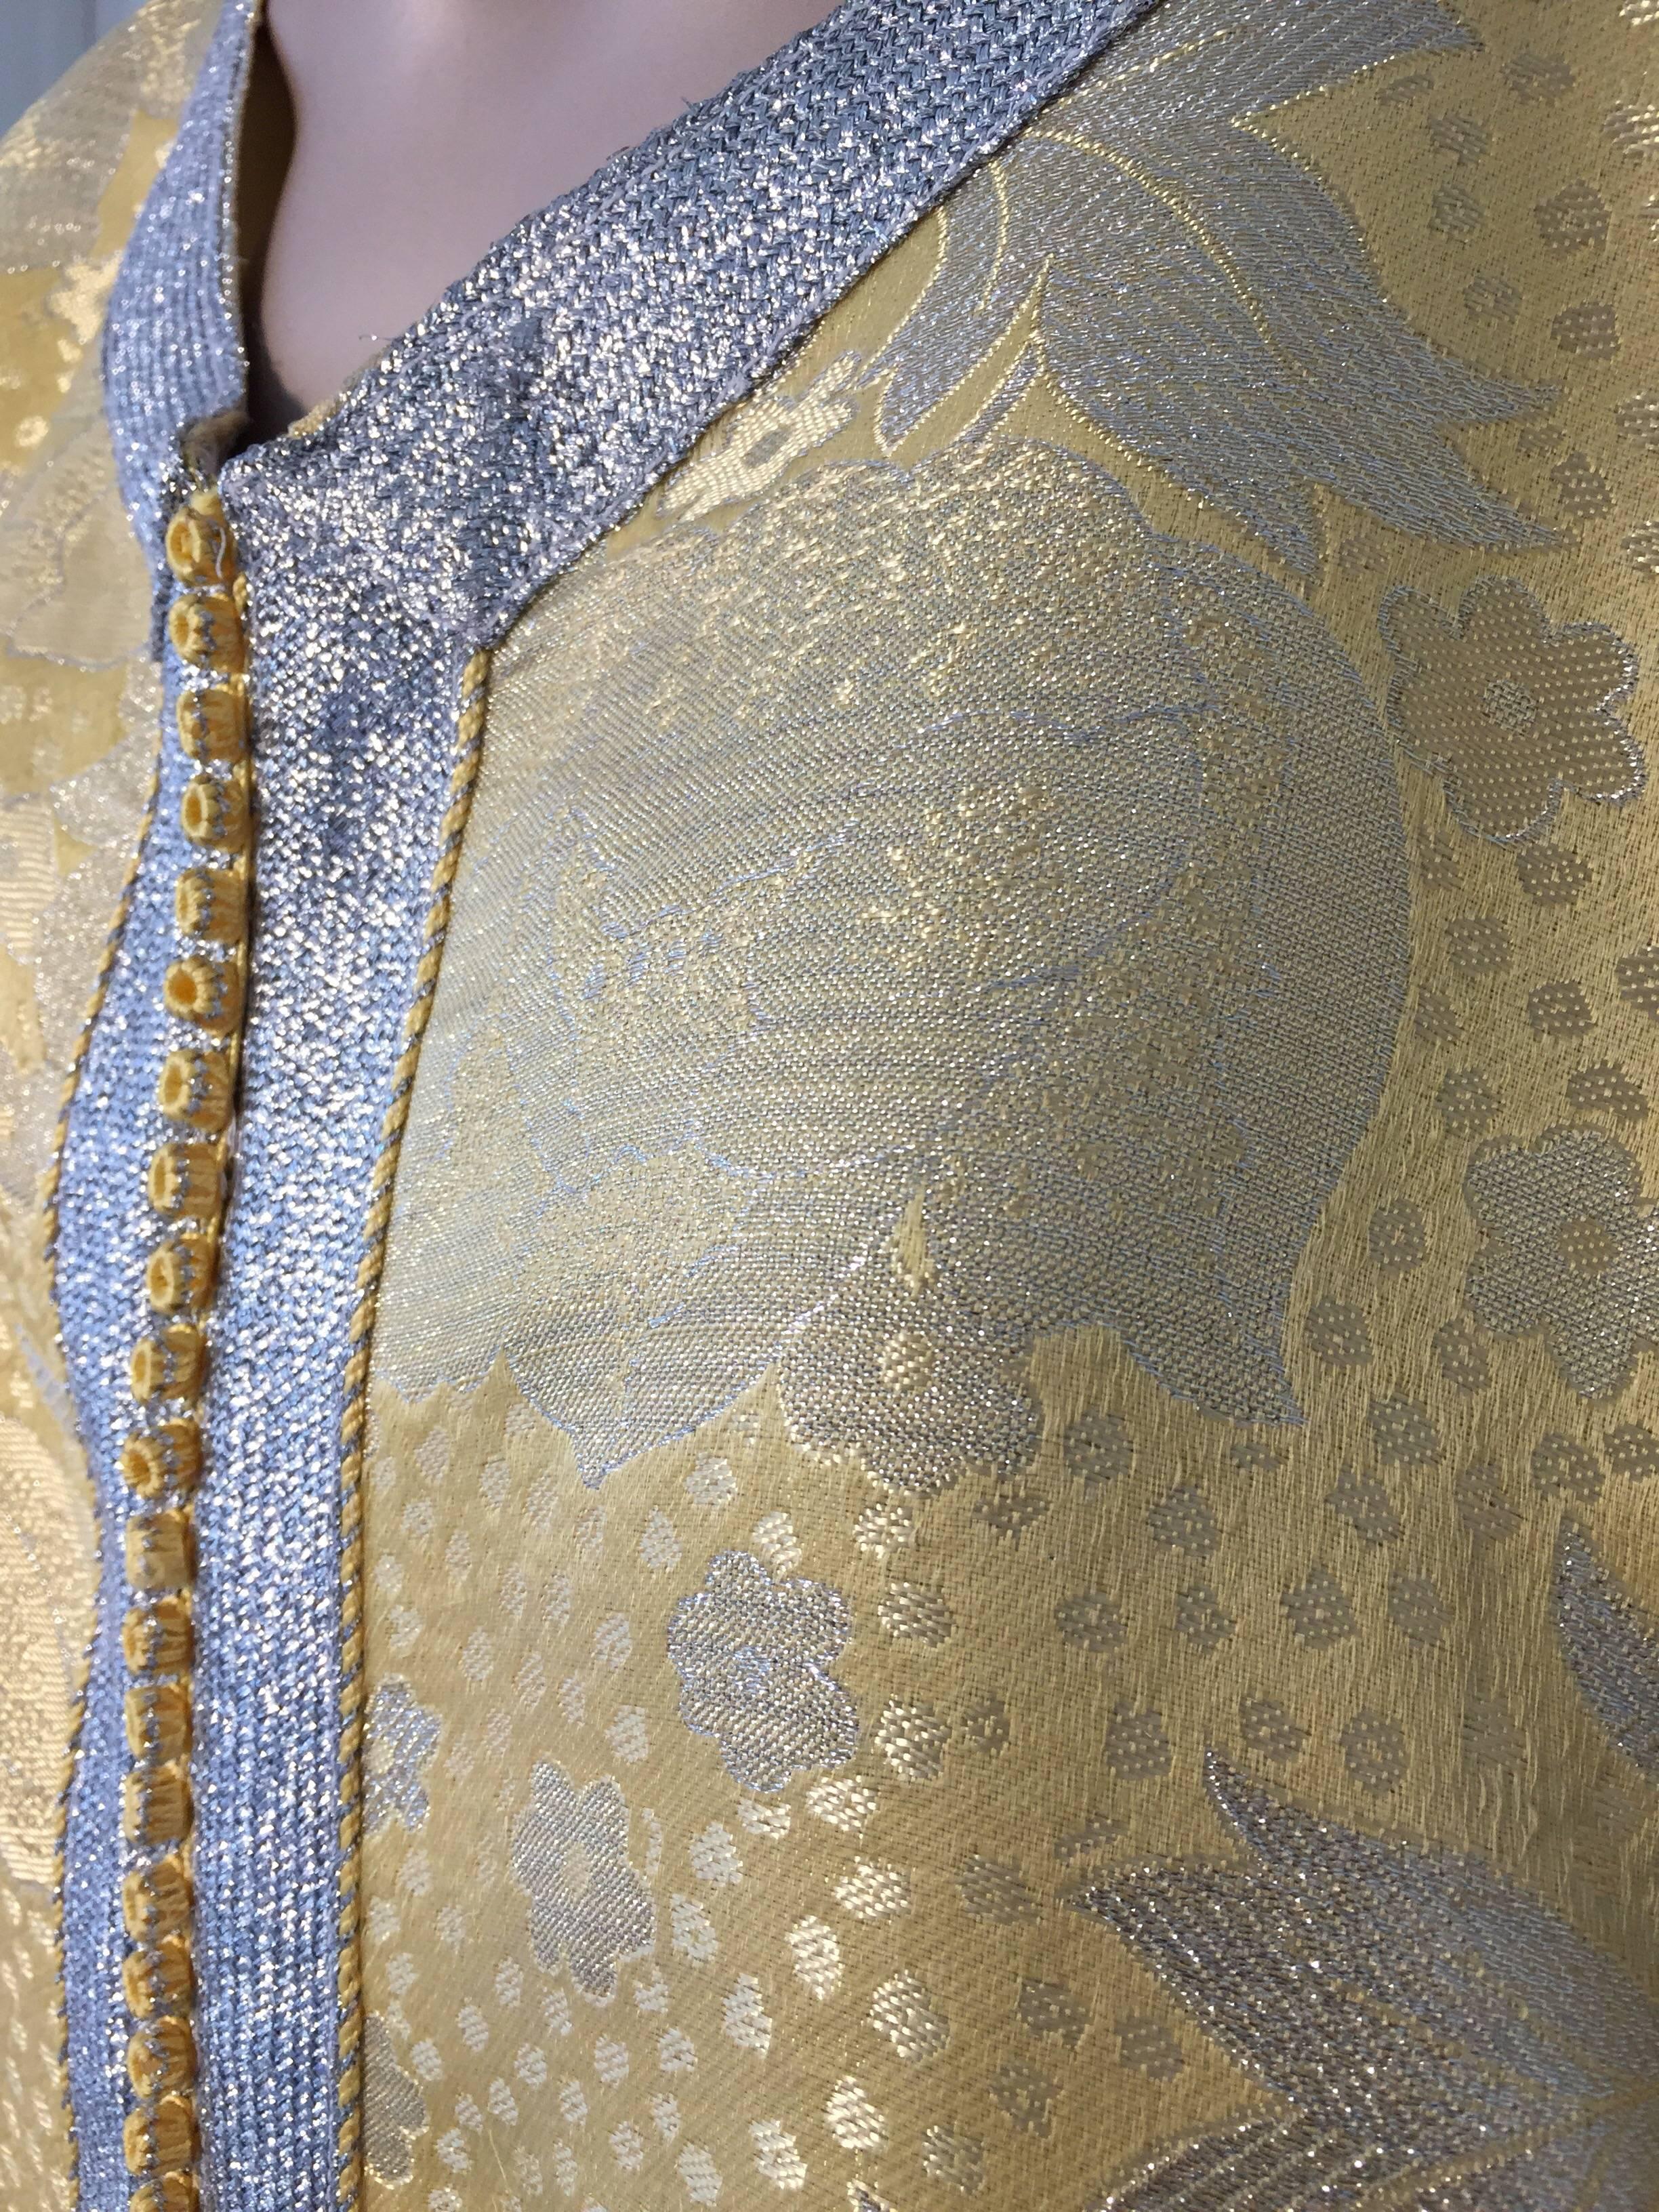 Metallic Gold and Silver Brocade 1970s Maxi Dress Caftan, Evening Gown Kaftan For Sale 2